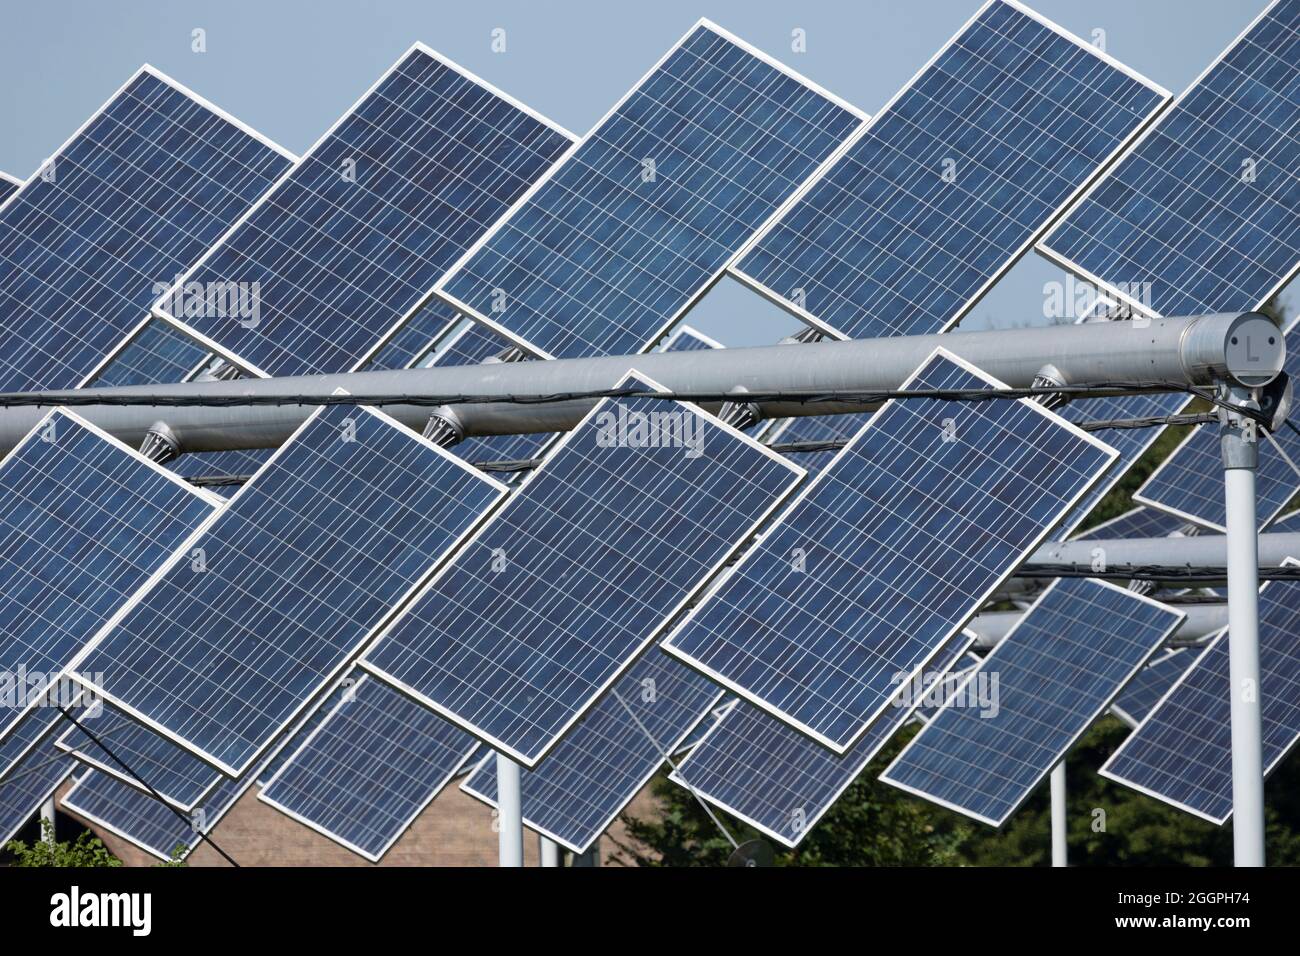 Agrivoltaics or agrophotovoltaics is co-developing the same area of land for both solar photovoltaic power as well as for agriculture. Stock Photo